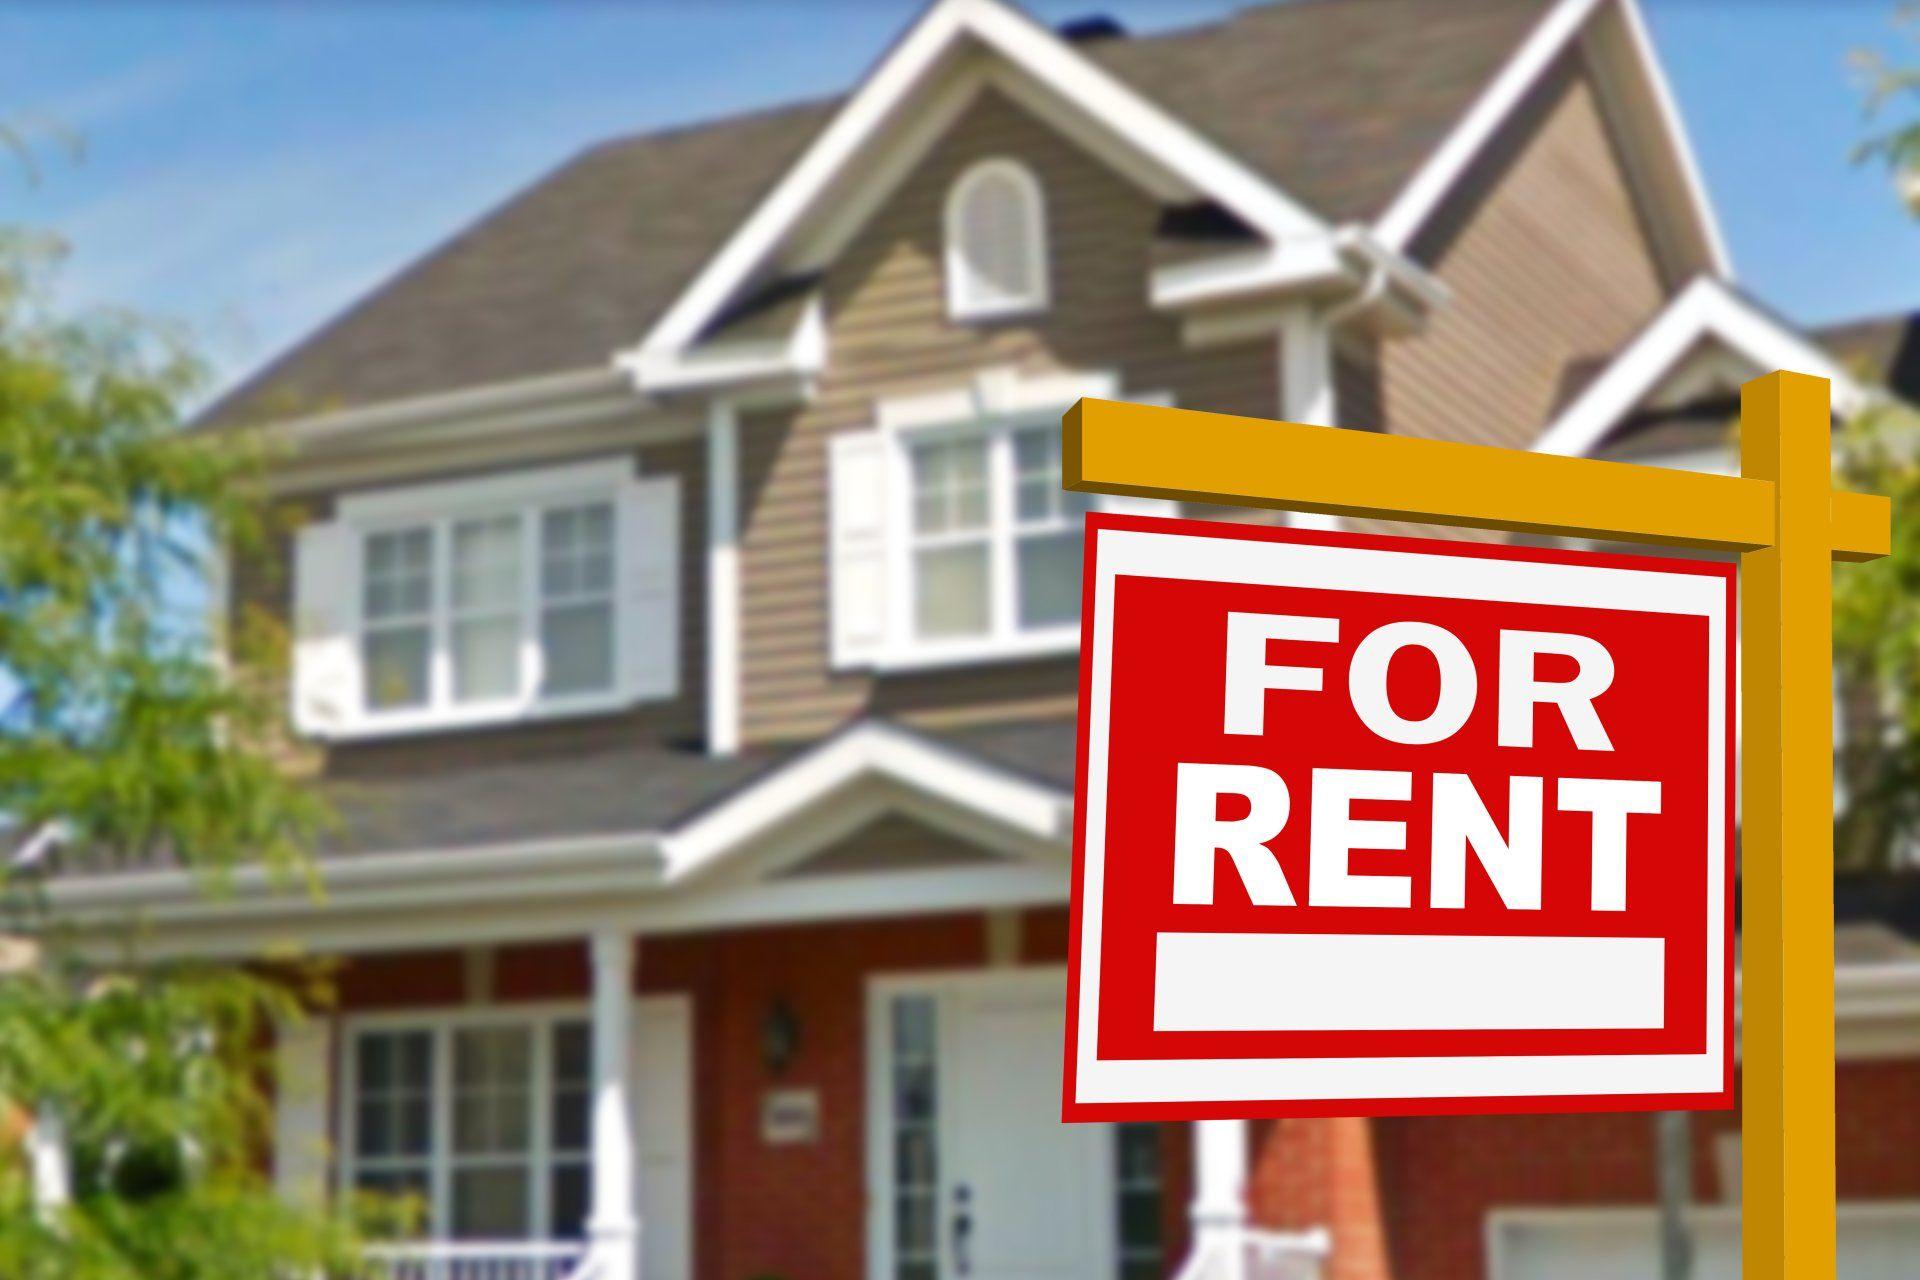 Where to rent house